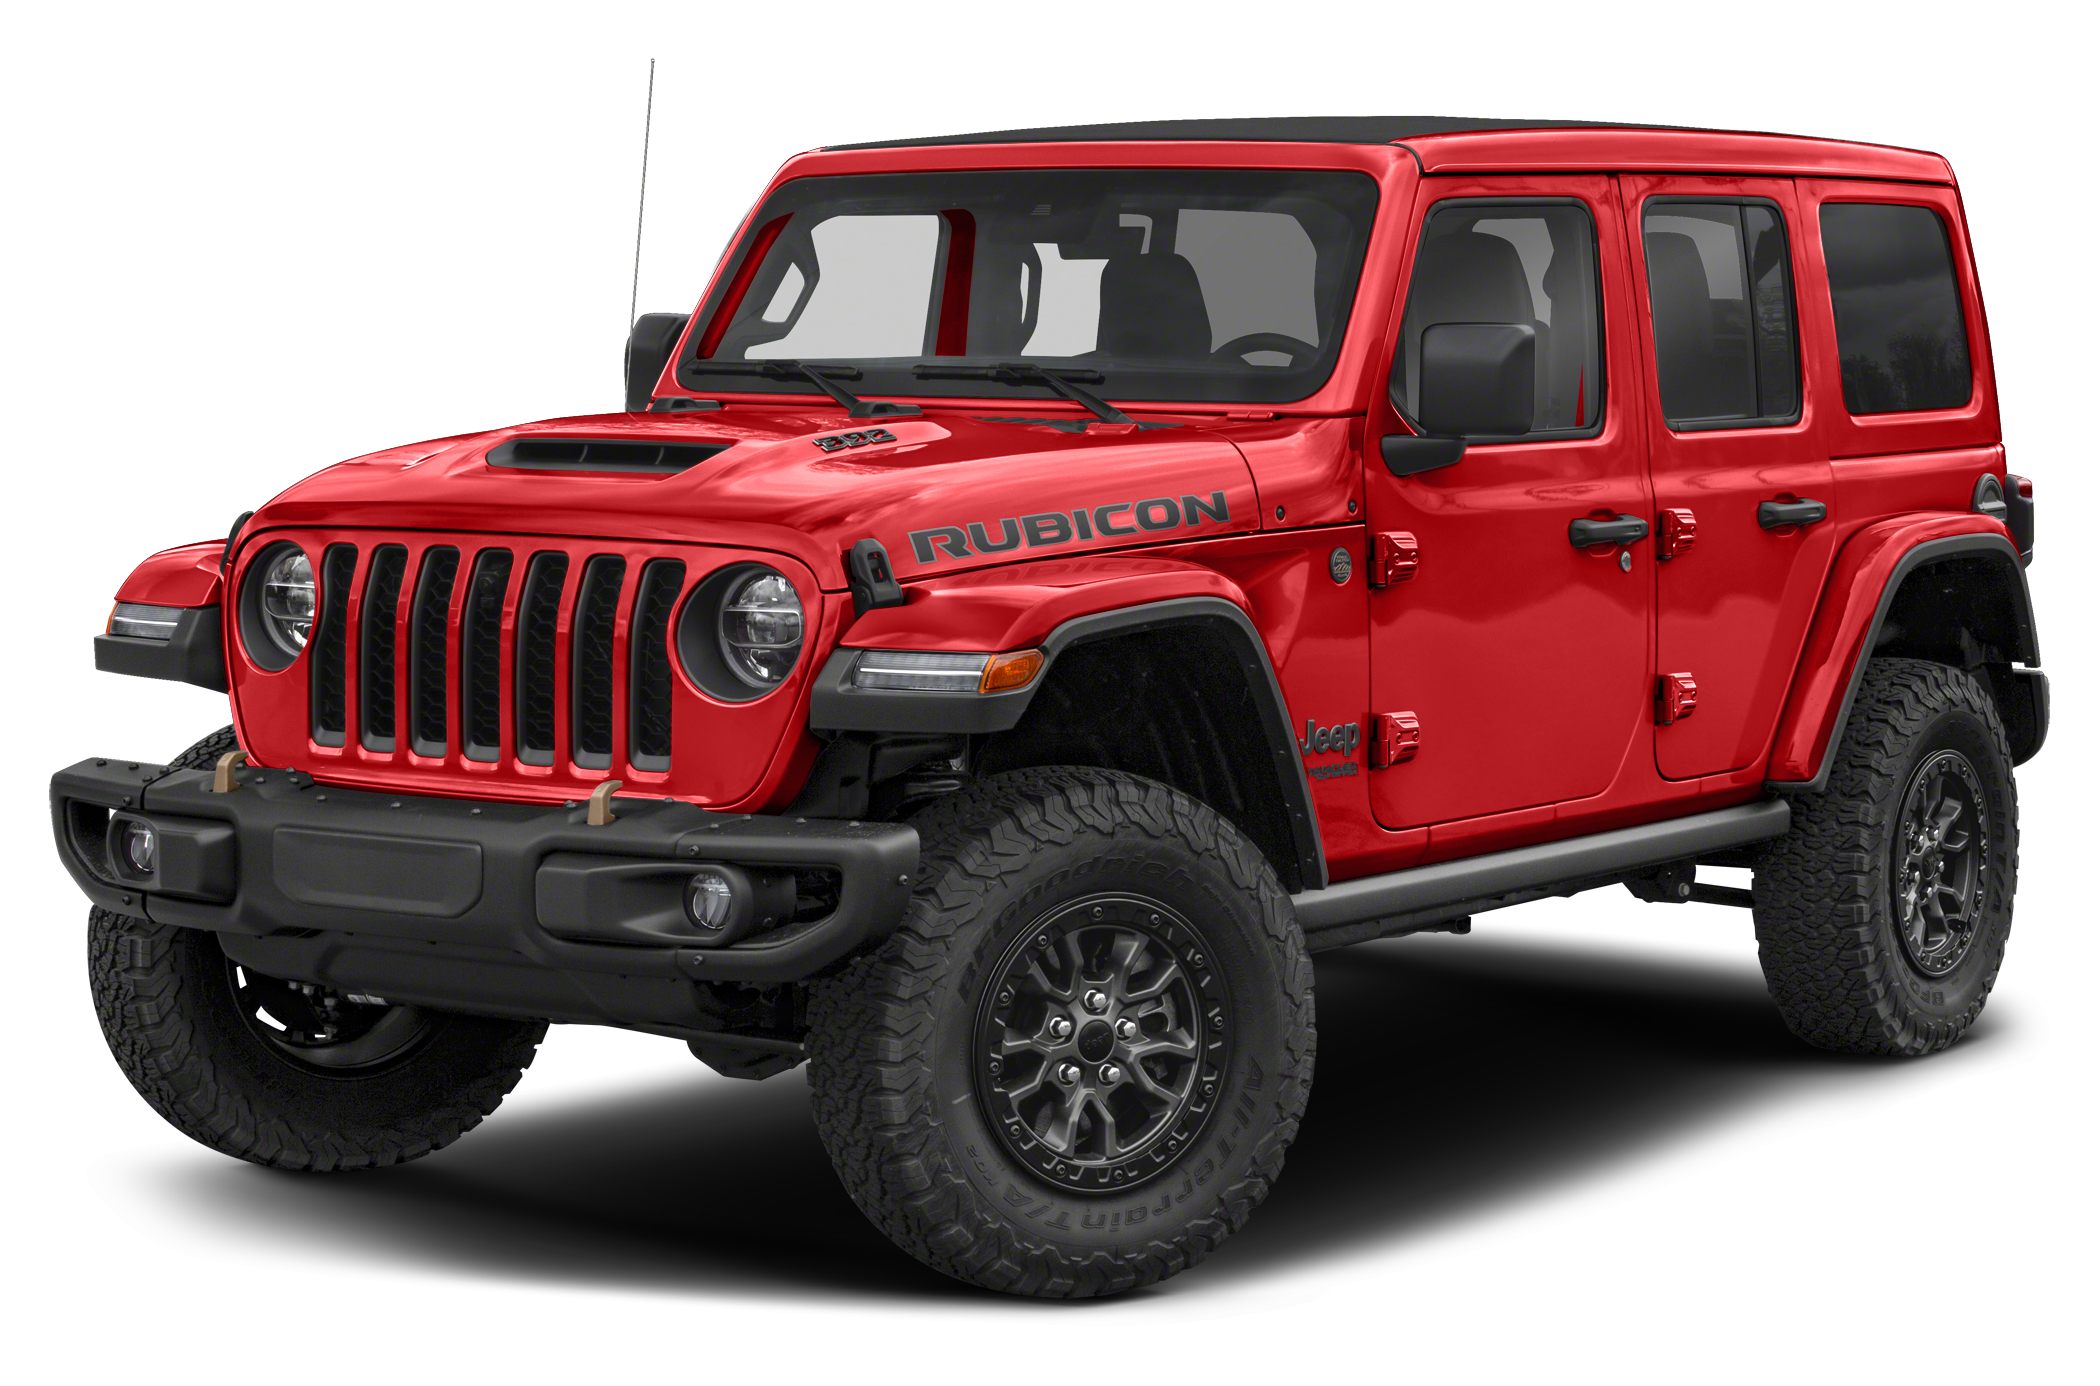 21 Jeep Wrangler Unlimited Rubicon 392 4dr 4x4 Pricing And Options